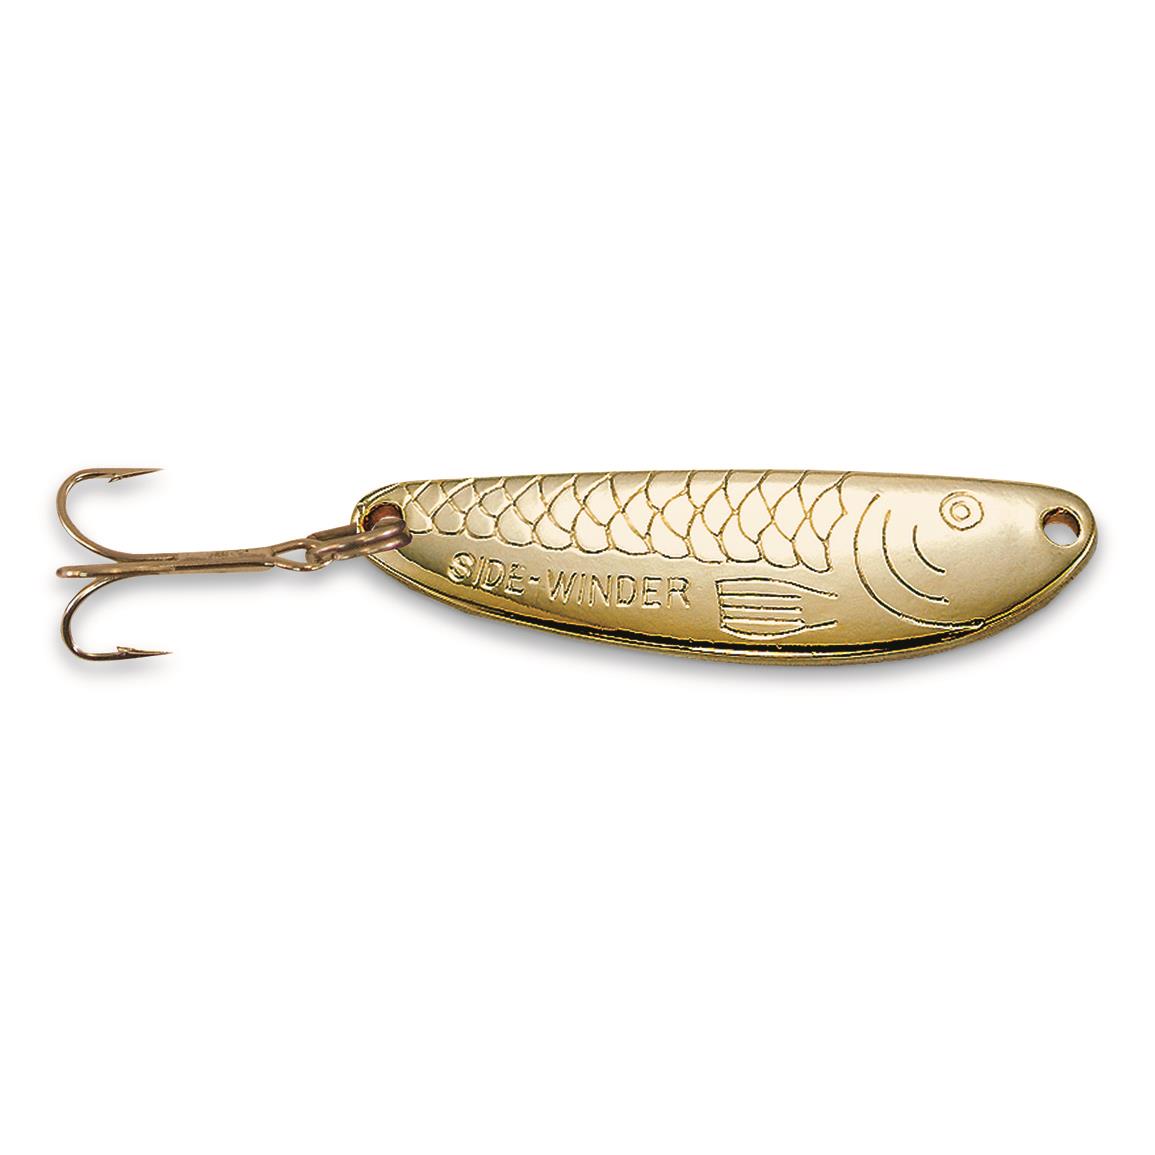 VMC Flash Champ Spoons - 735089, Ice Tackle at Sportsman's Guide